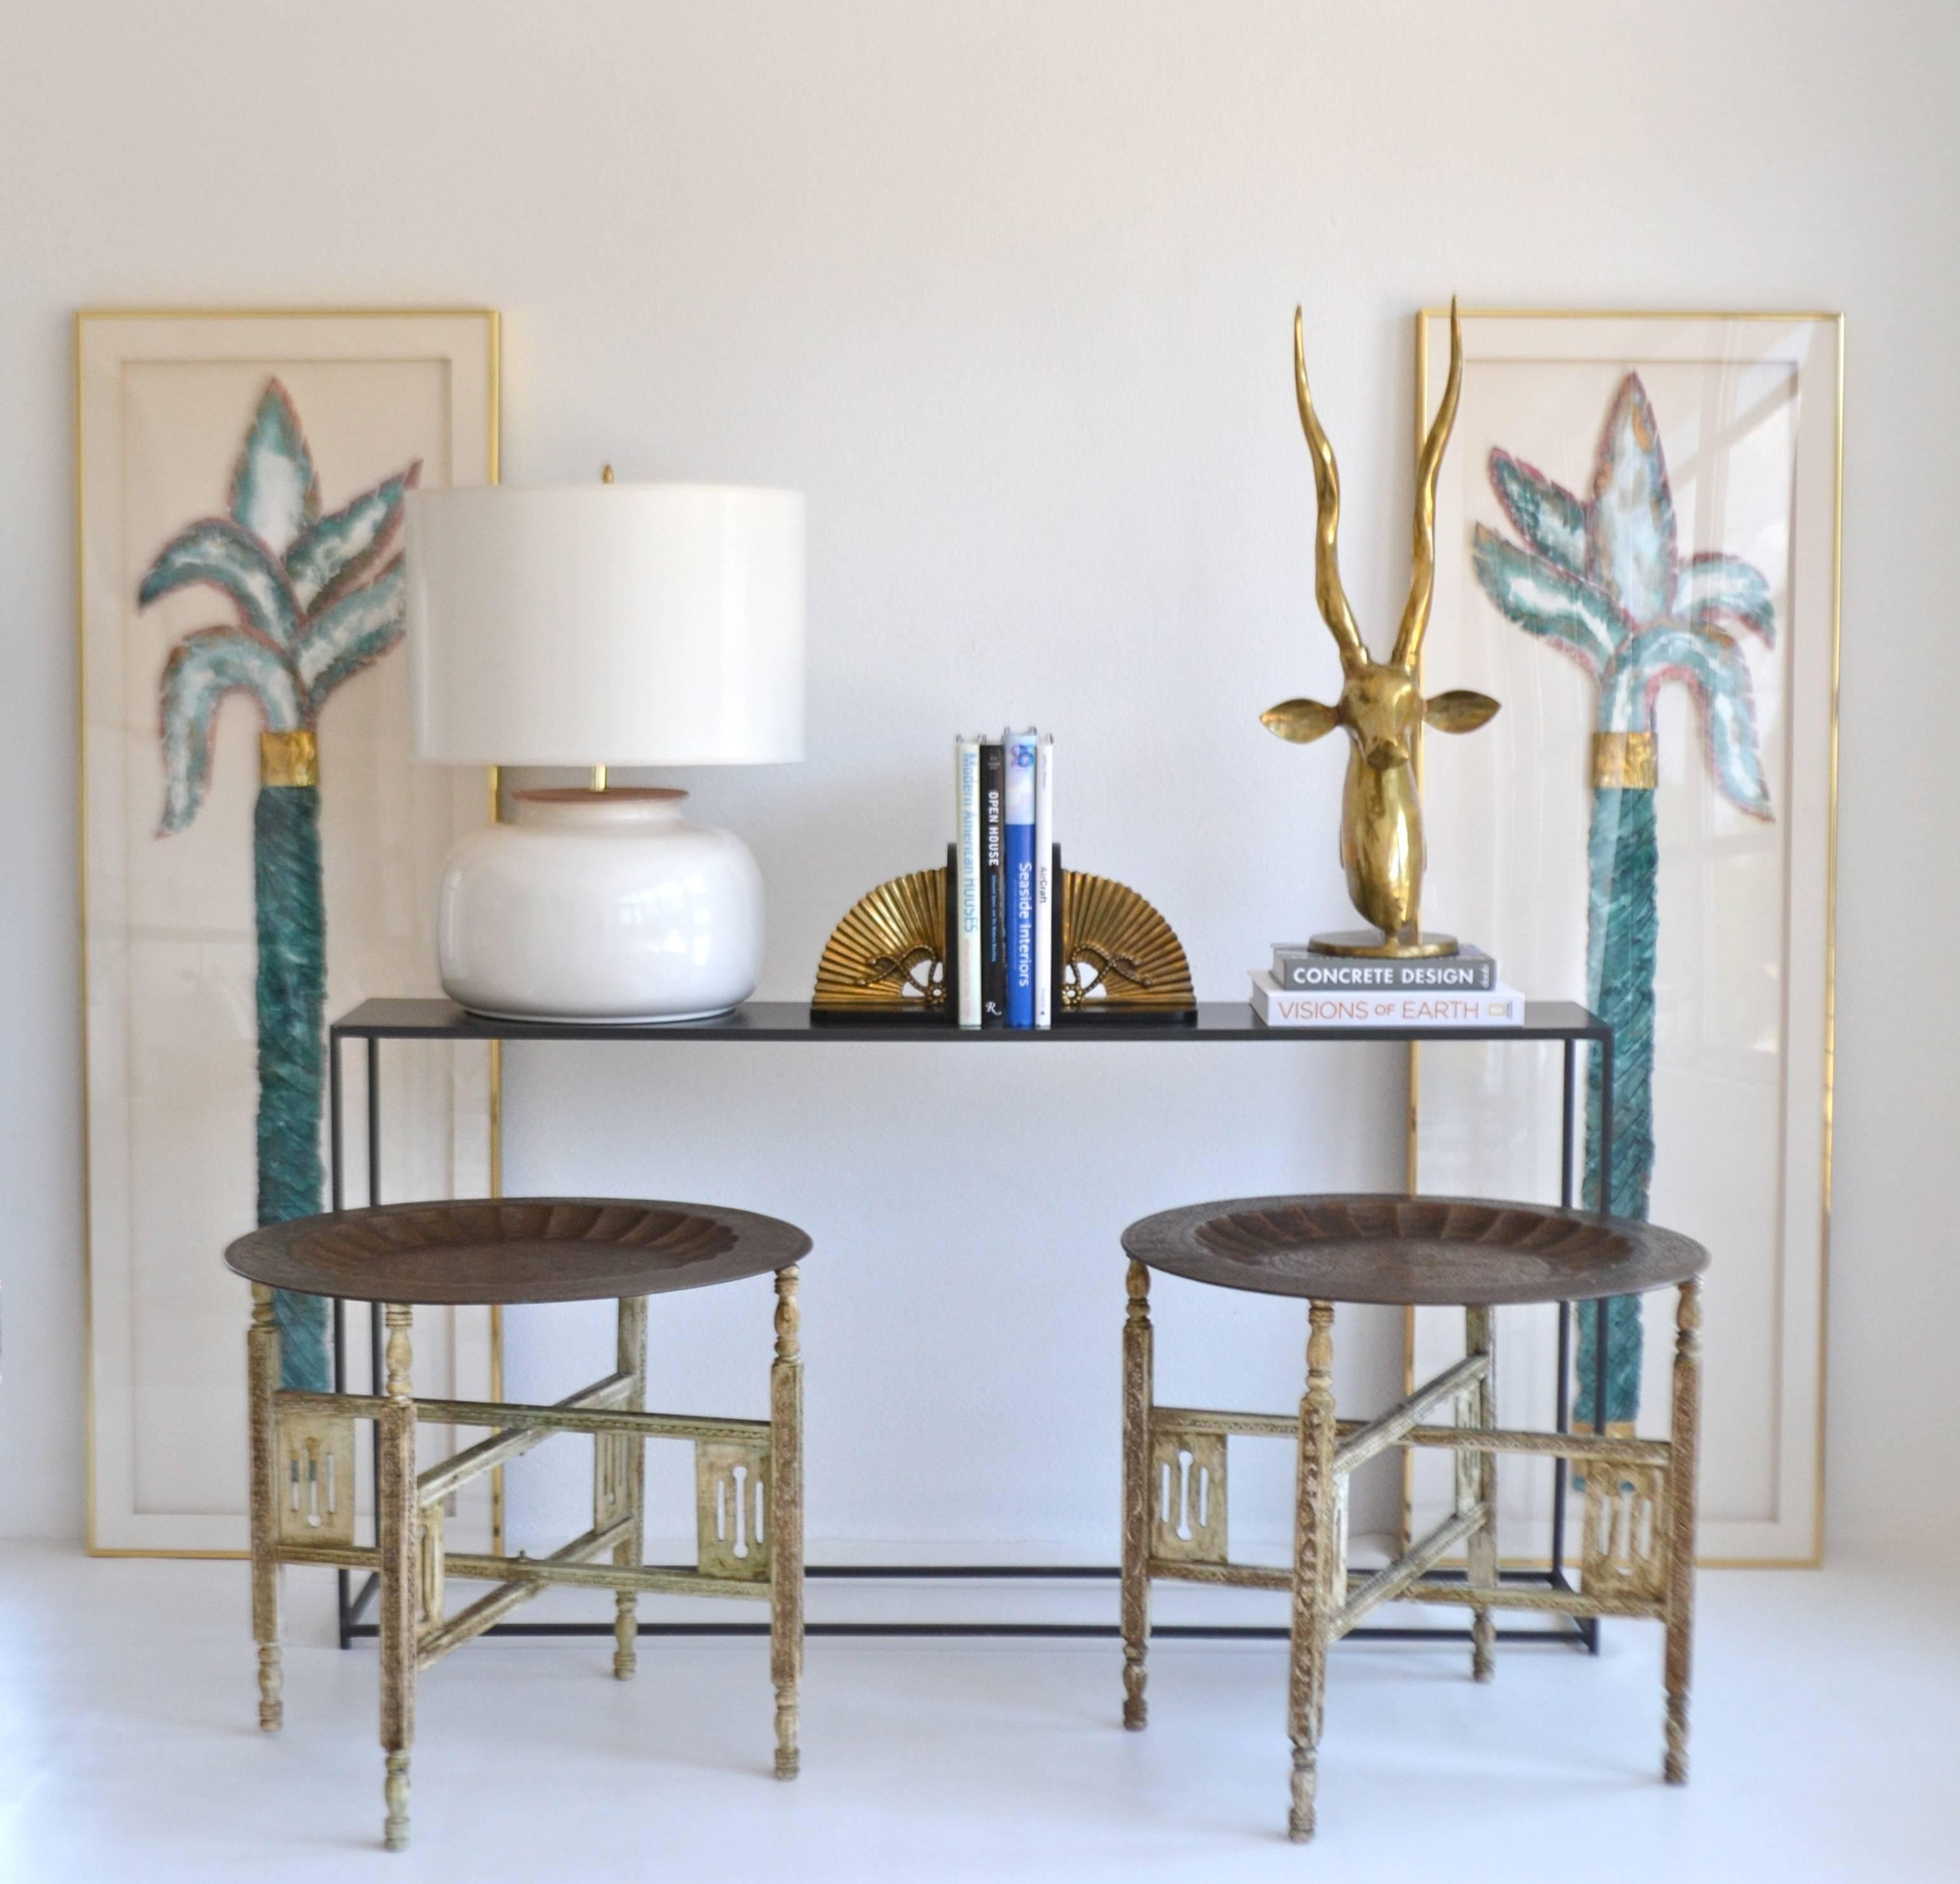 Striking pair of Anglo-Indian brass tray tables, circa 1940s -1950s. These sculptural side tables are designed of etched brass trays on distressed painted hand-carved wooden folding bases. The pair can also be versatilely used as a cocktail or